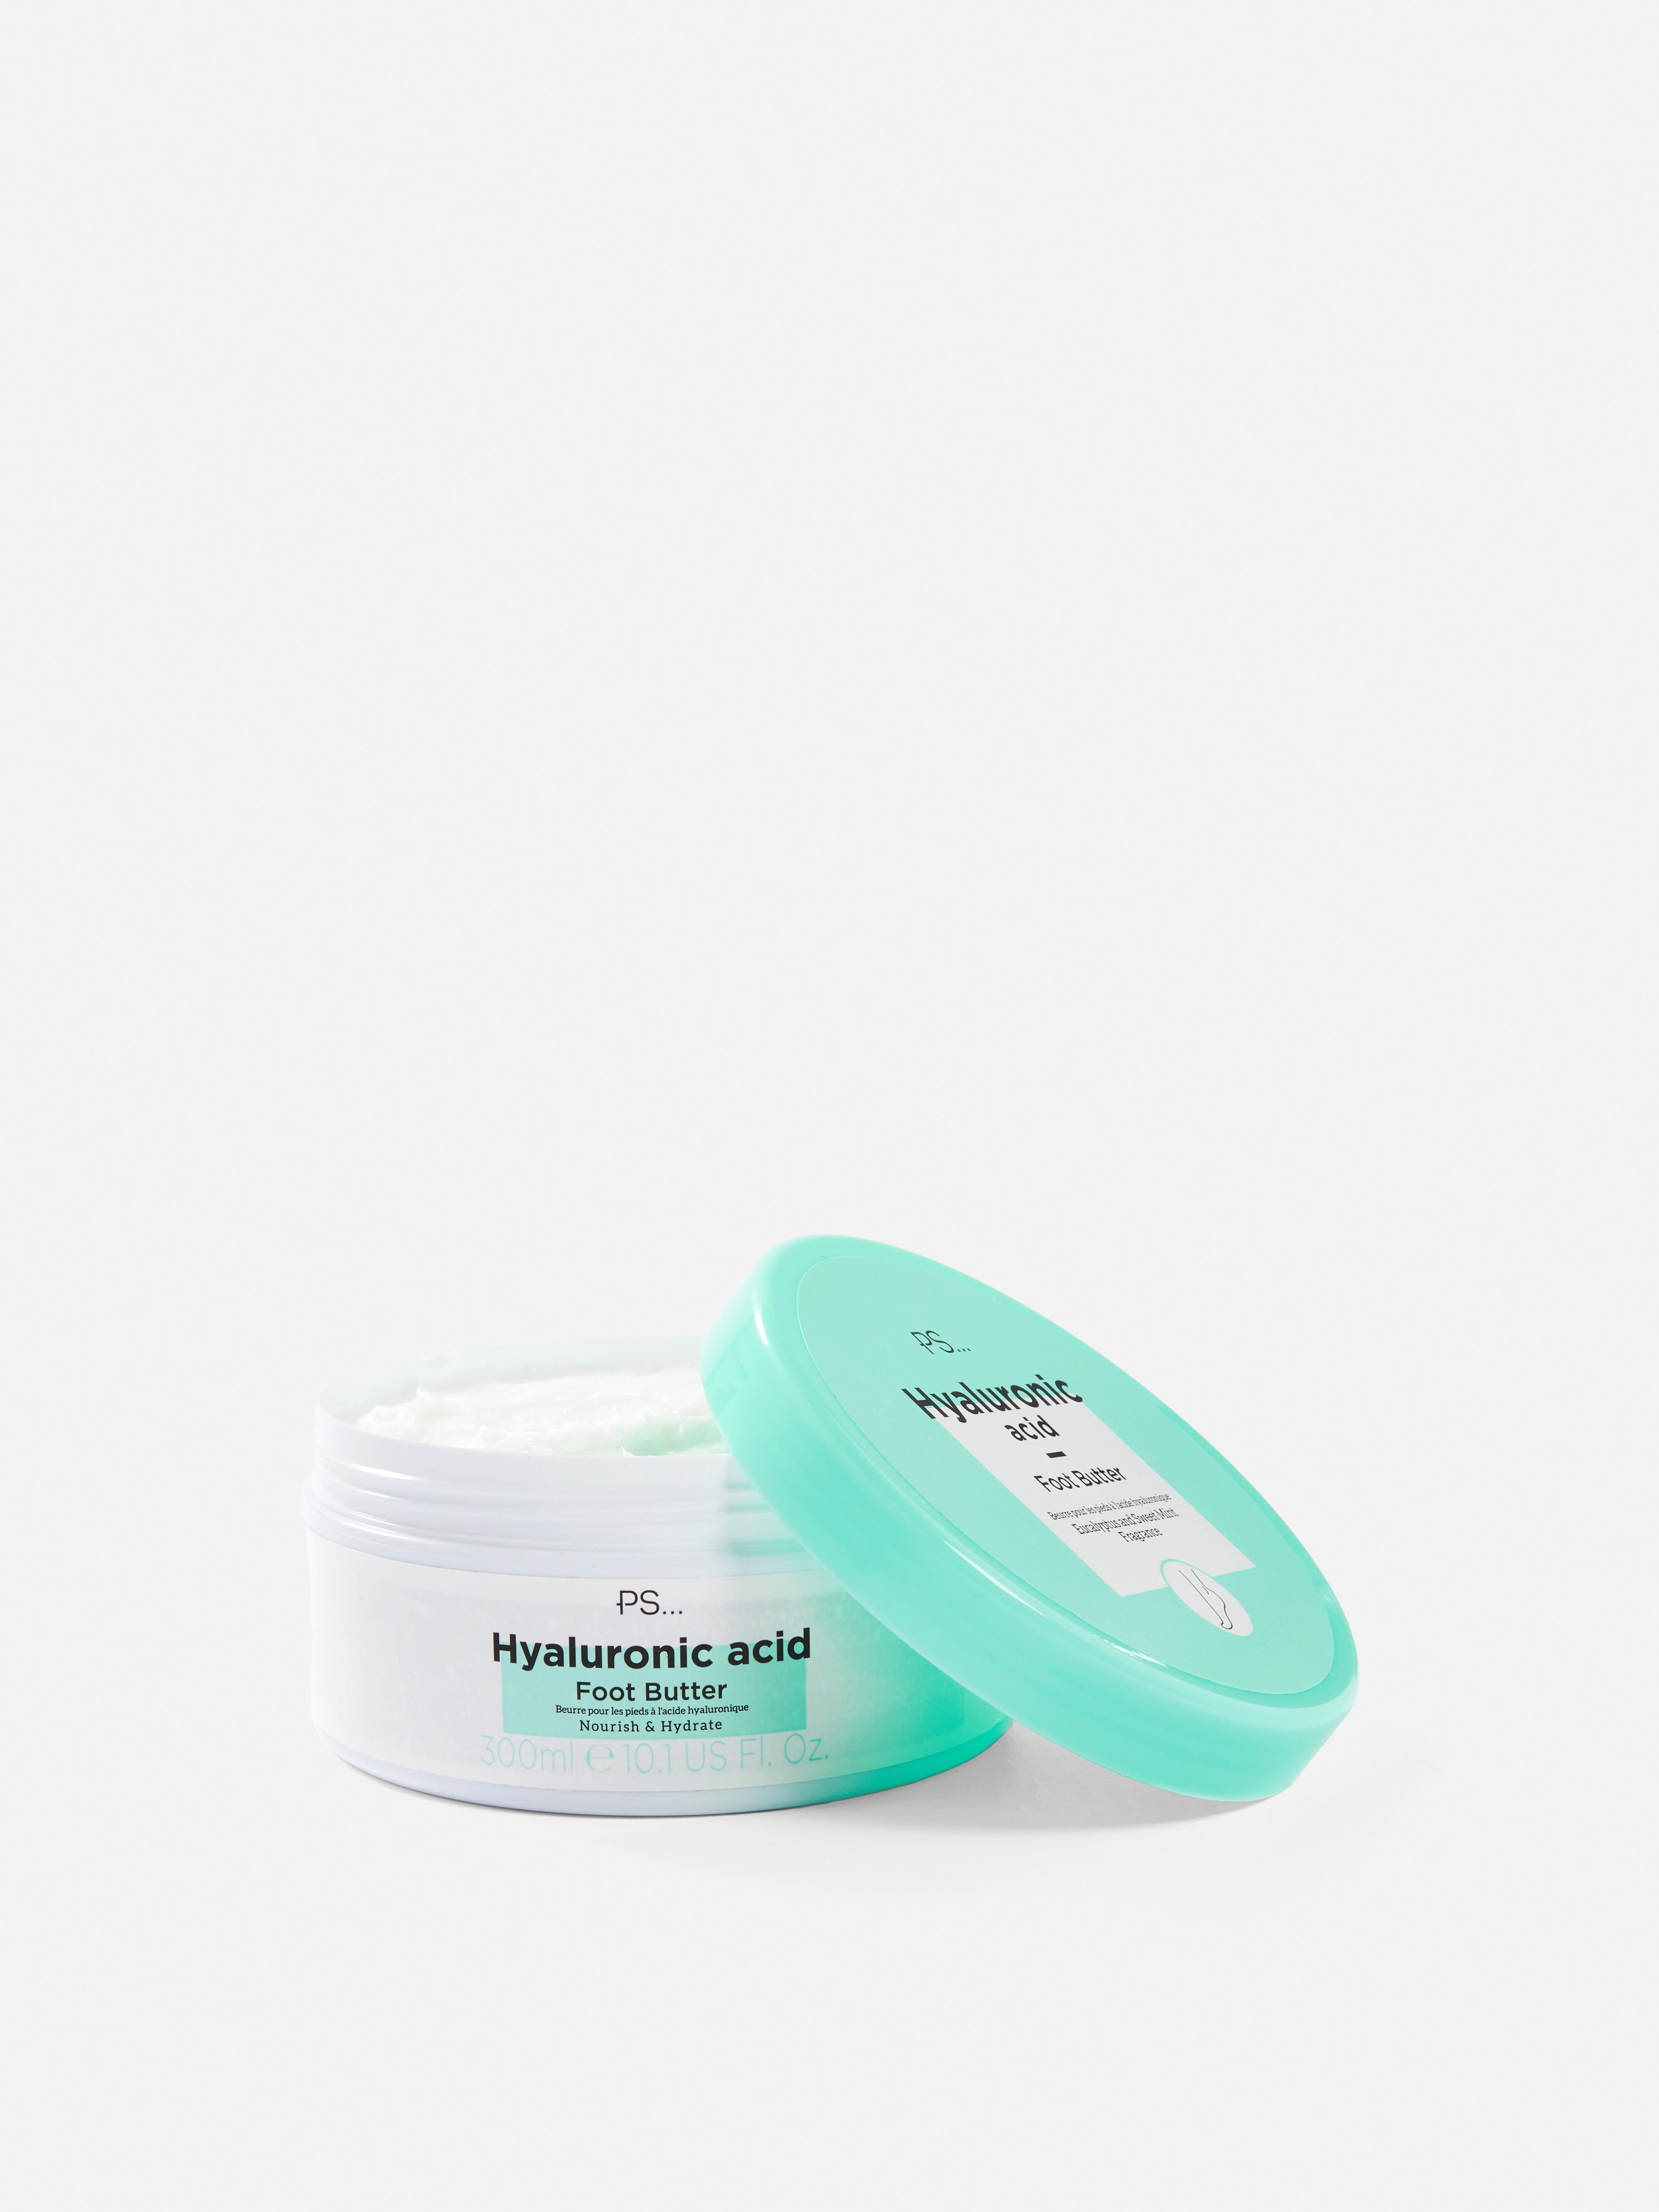 PS Hyaluronic Acid Foot Butter